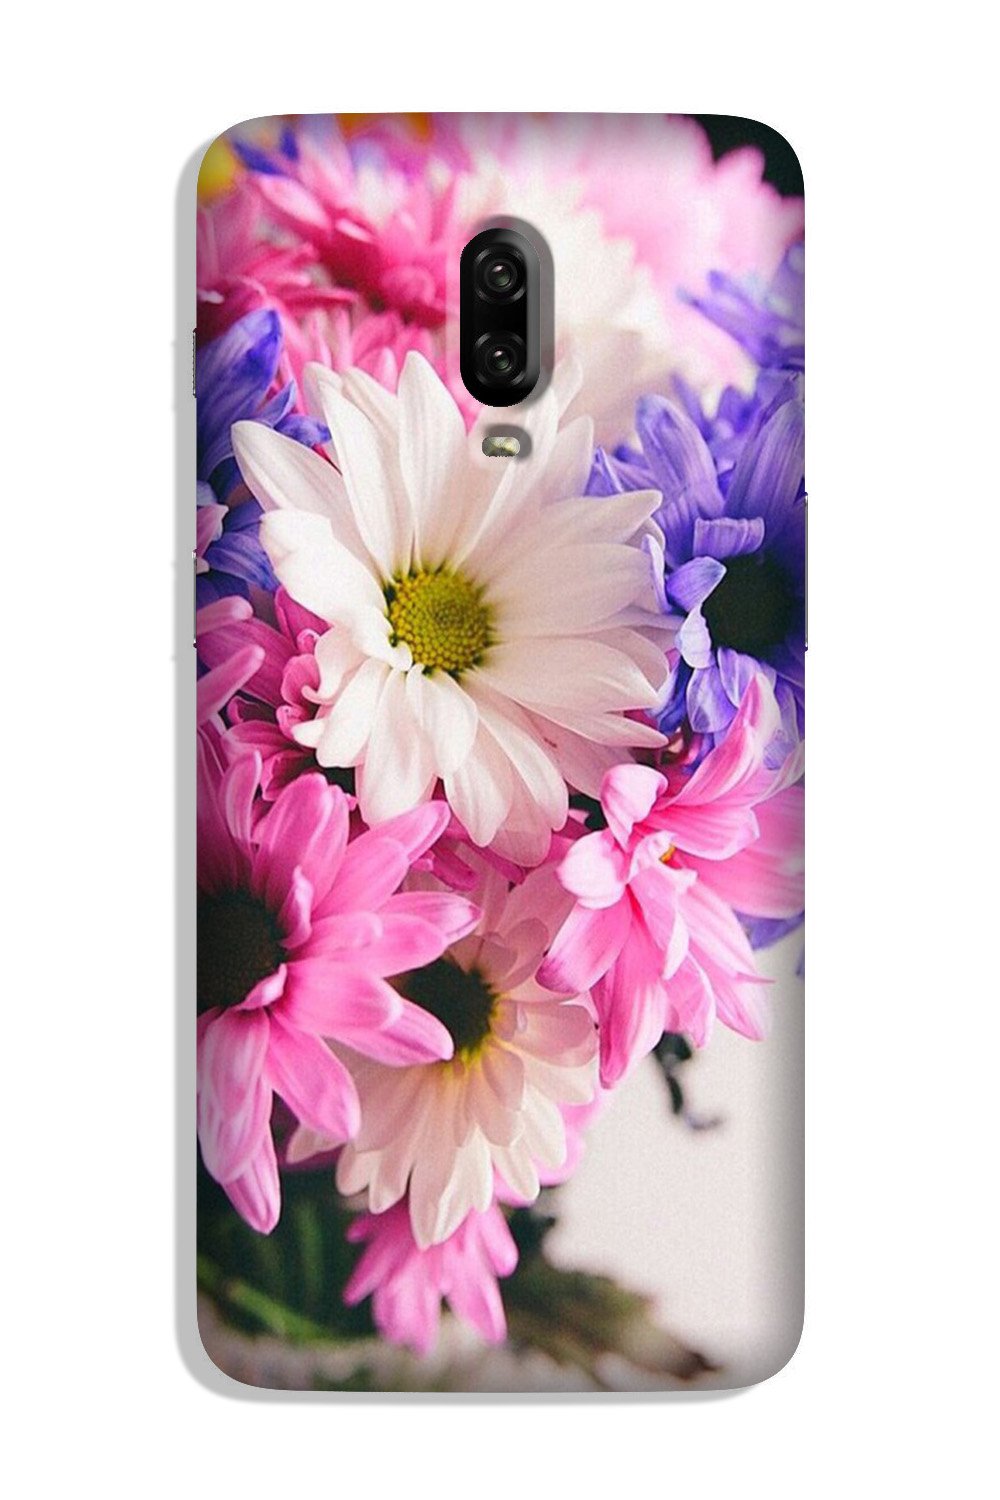 Coloful Daisy Case for OnePlus 7